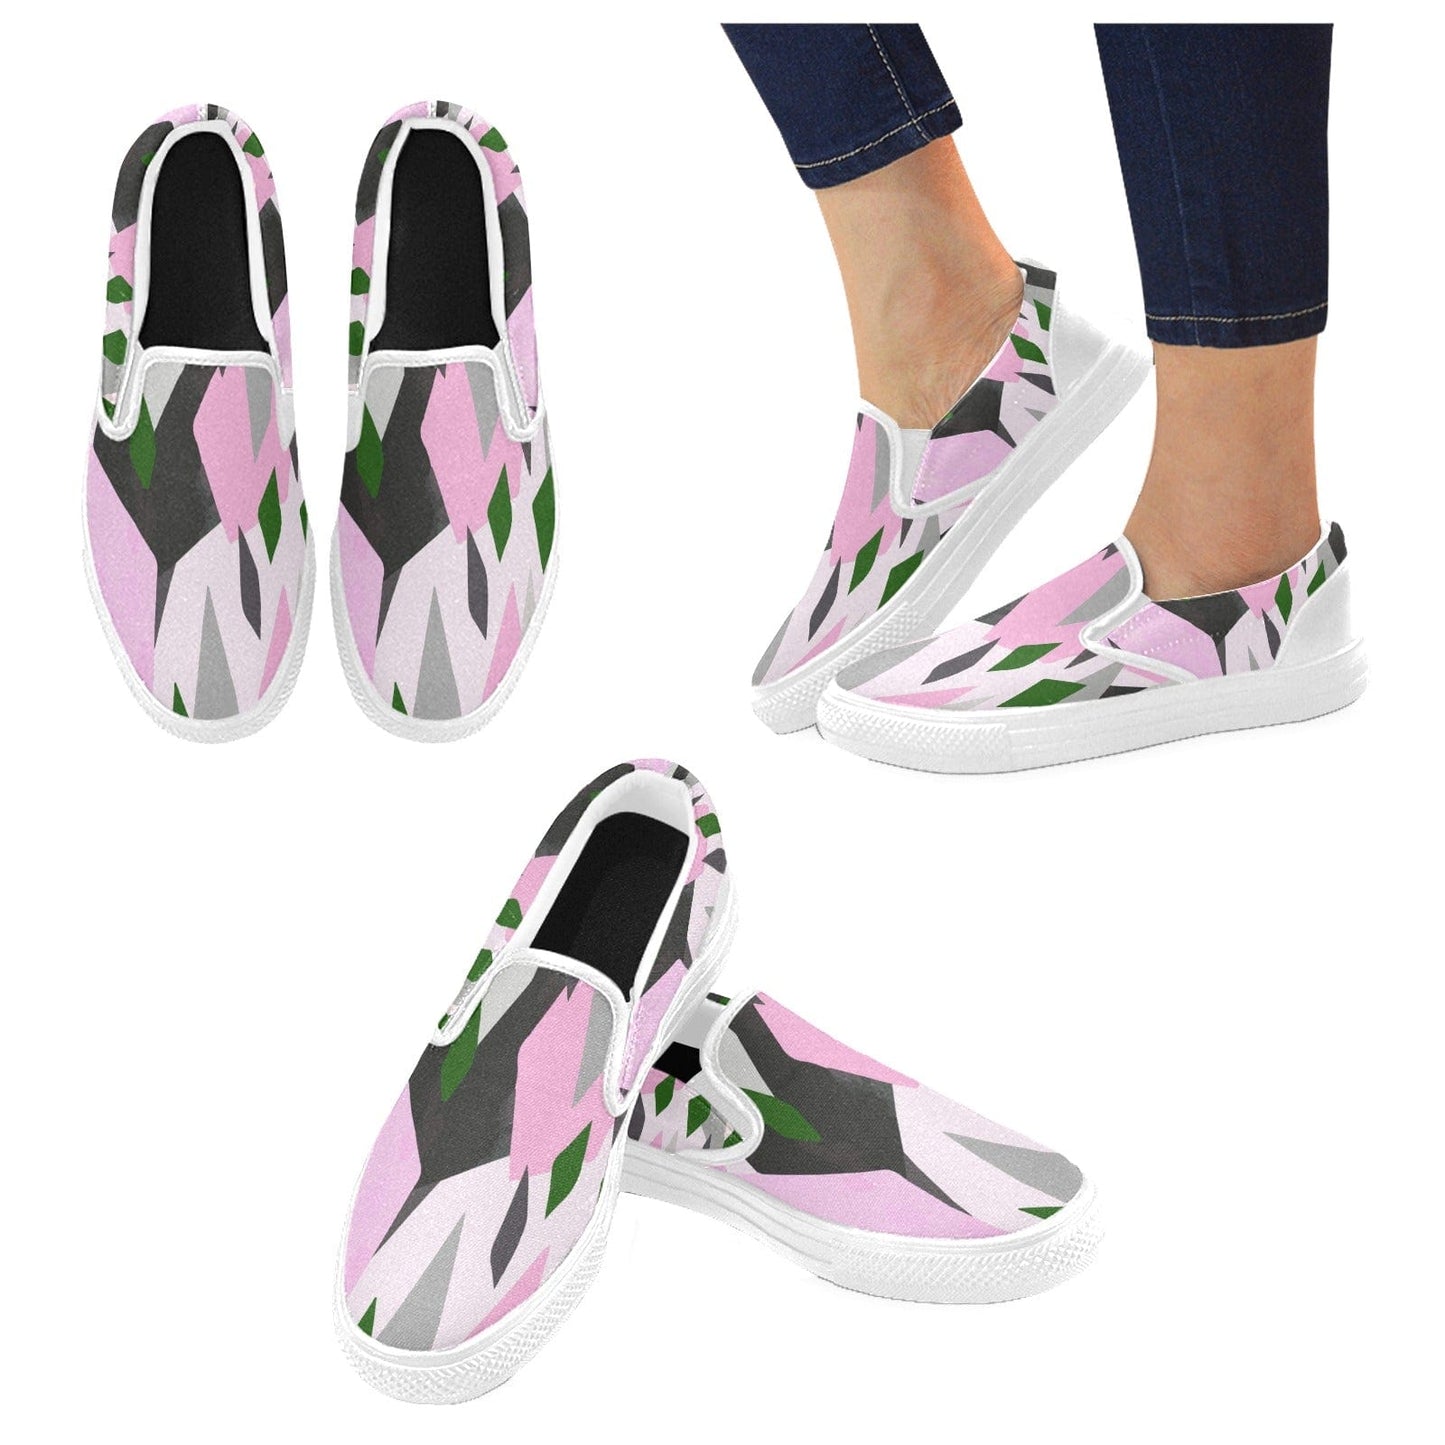 Slip-on Canvas Men's Shoes (Model019)(Two Shoes With Different Printing) - CLASSY CLOSET BOUTIQUE